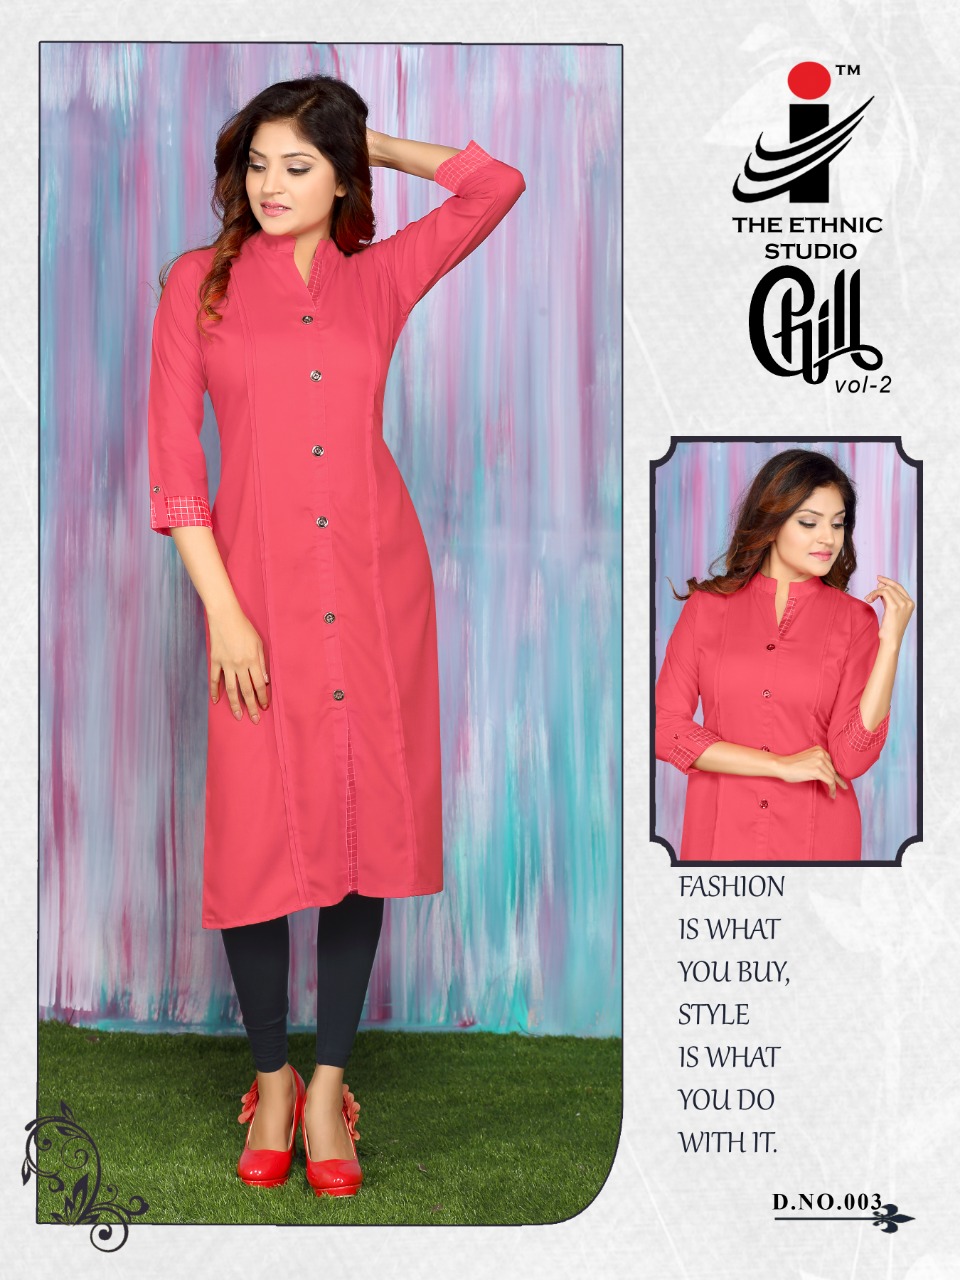 The ethnic studio chill vol 2 rayon ready to wear kurties exporter